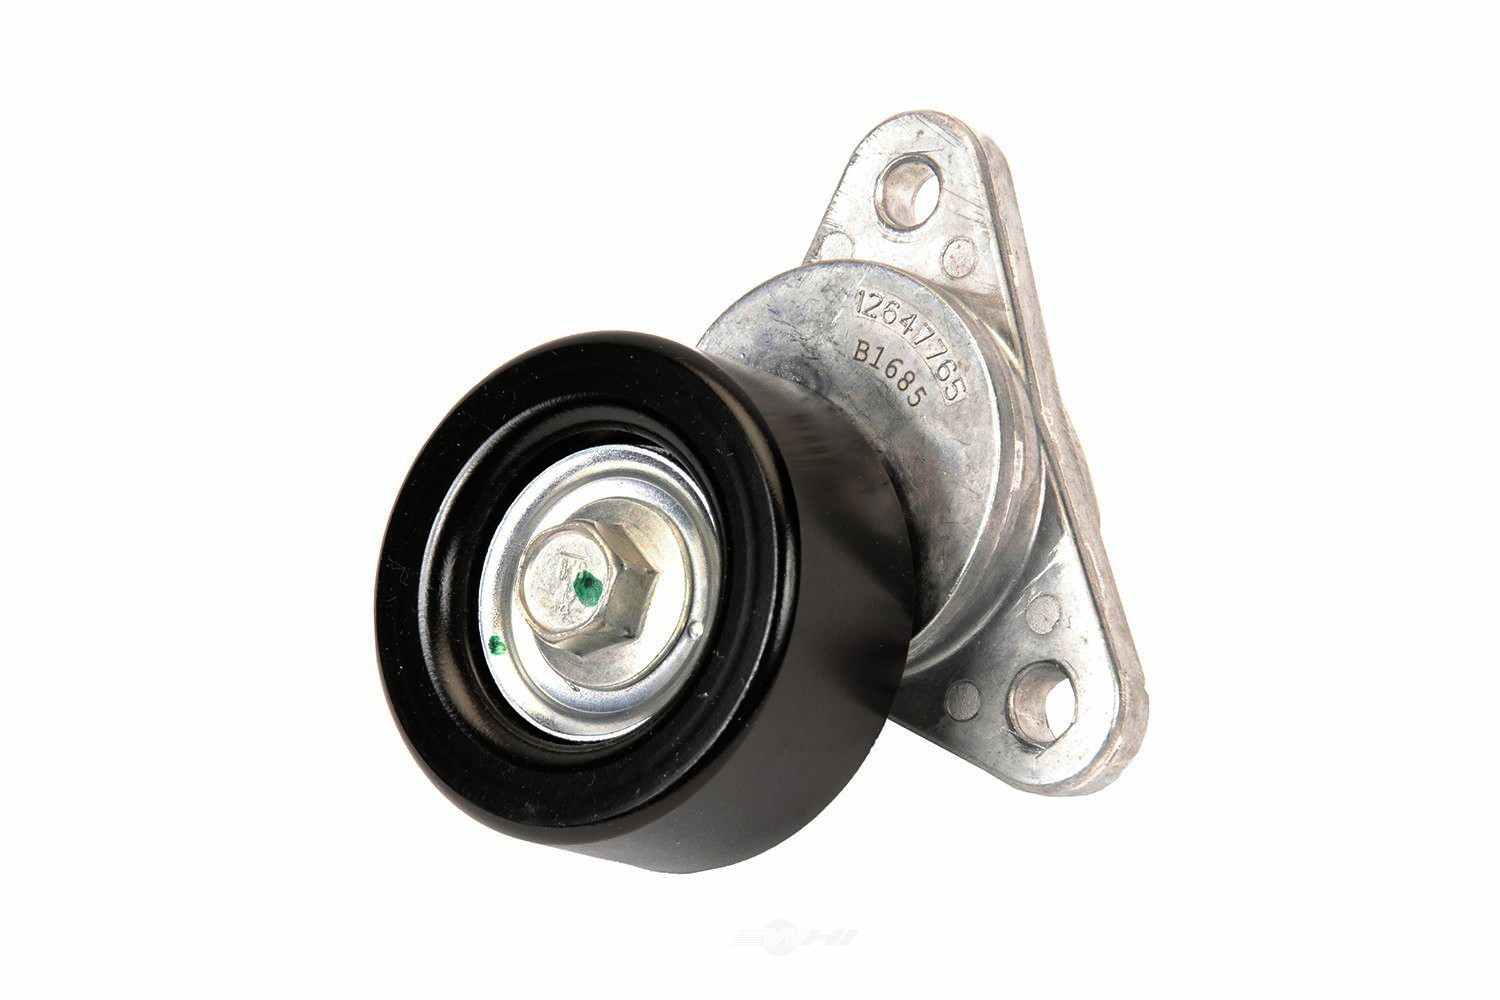 GM GENUINE PARTS CANADA - Accessory Drive Belt Tensioner Assembly - GMC 12647765